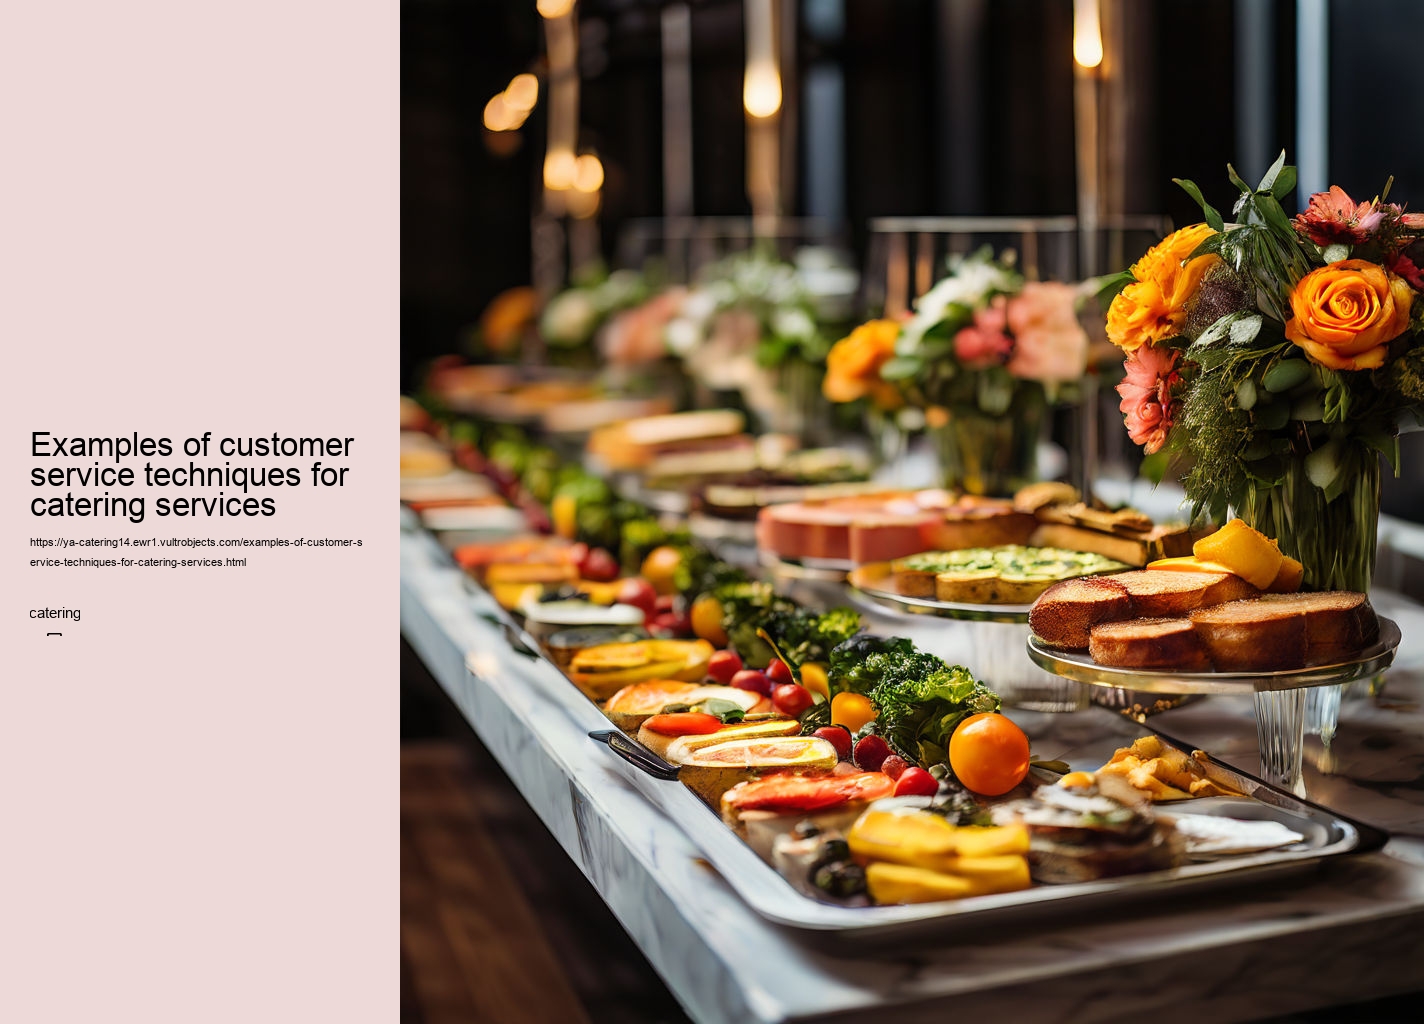 Examples of customer service techniques for catering services